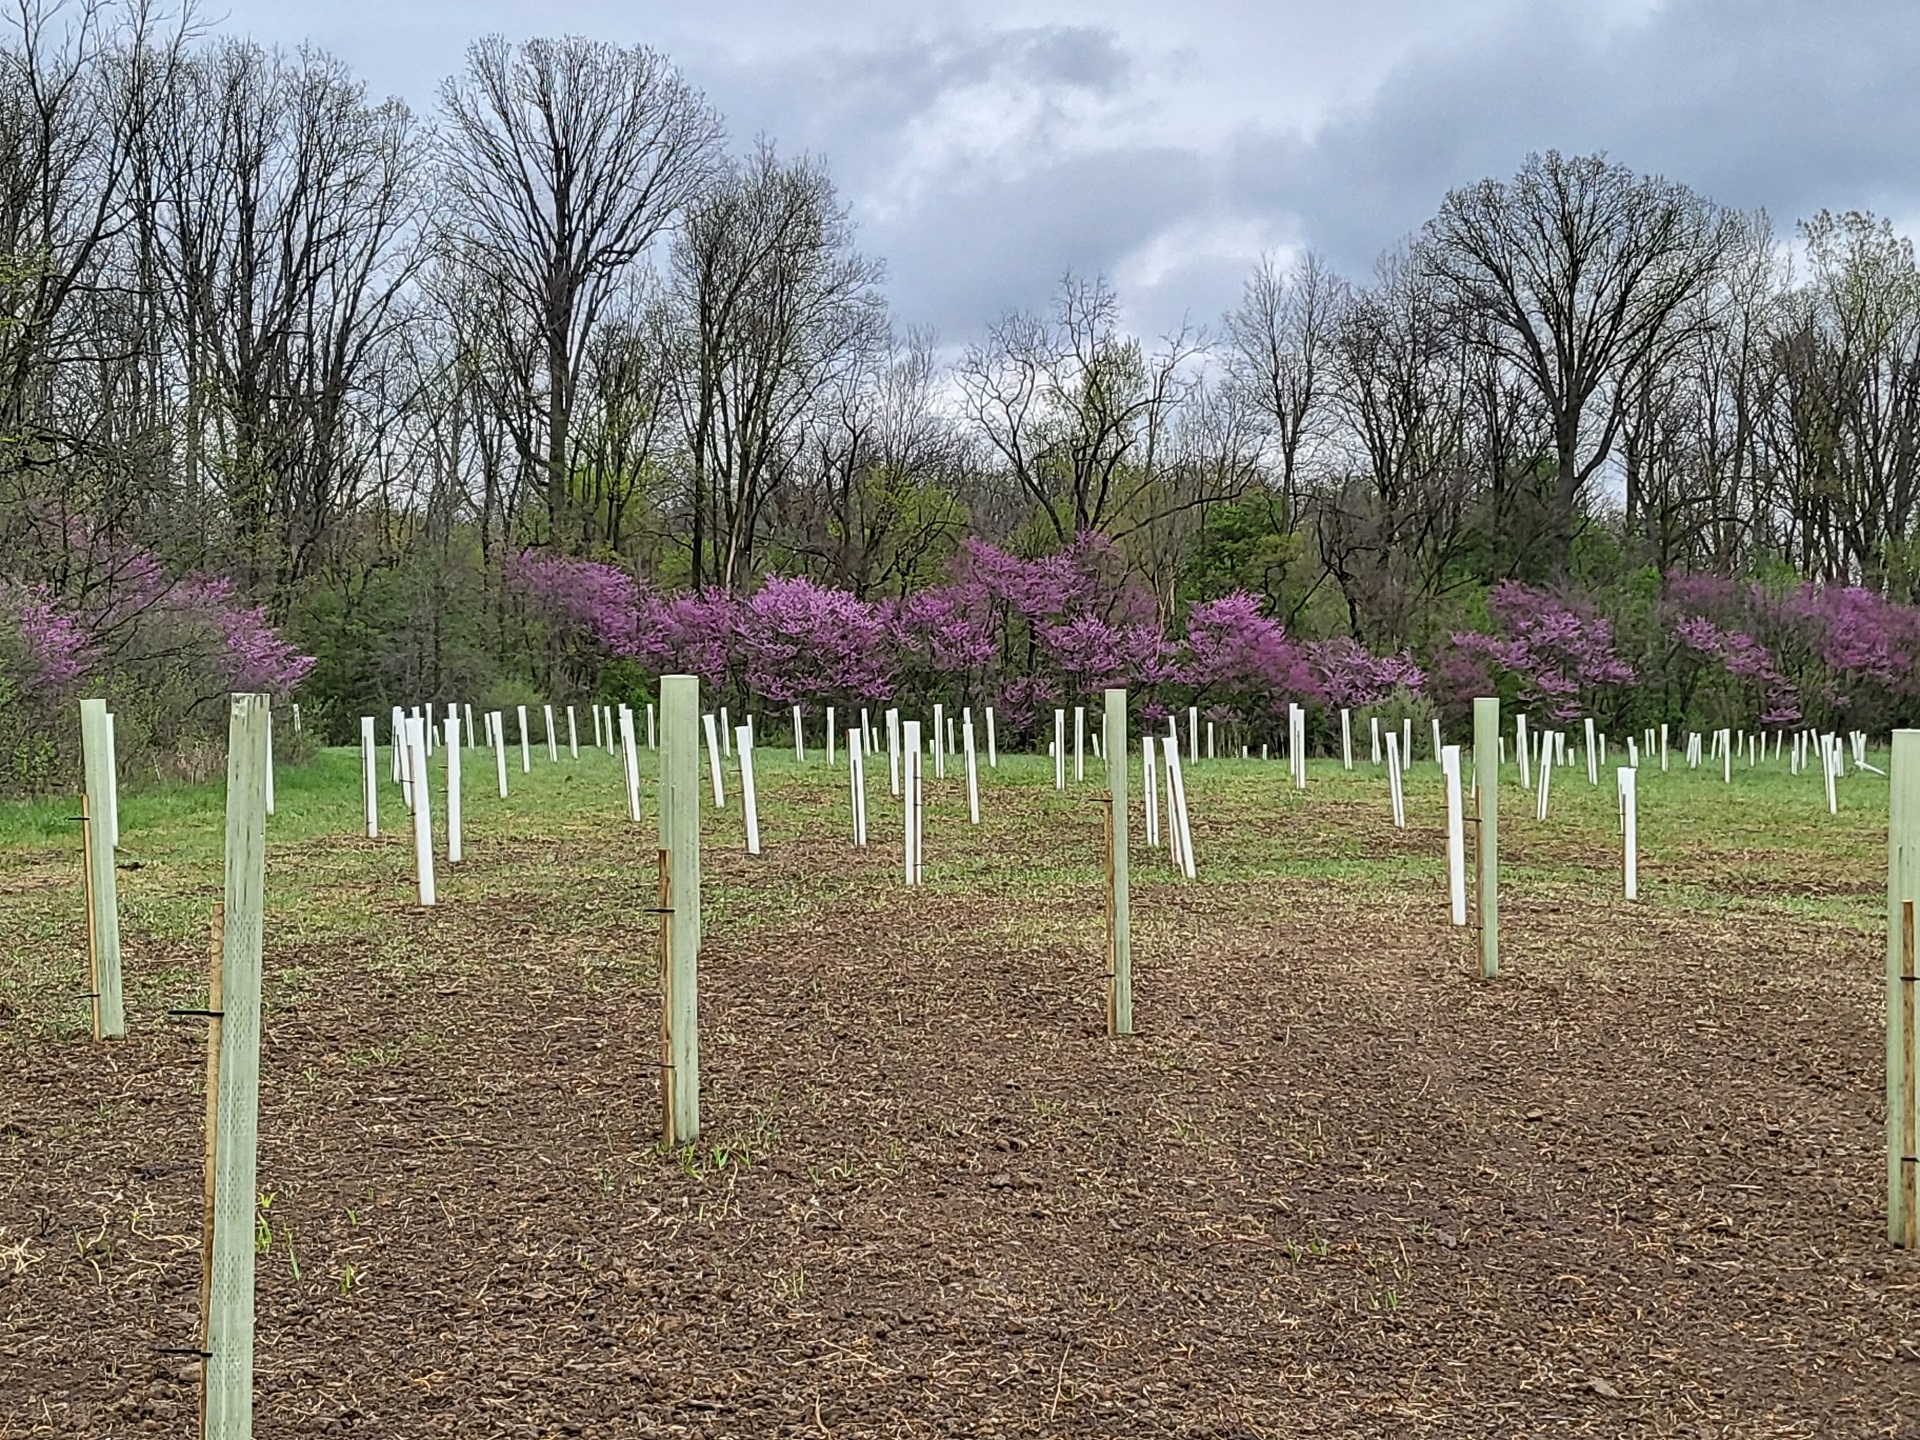 newly planted trees with tubes